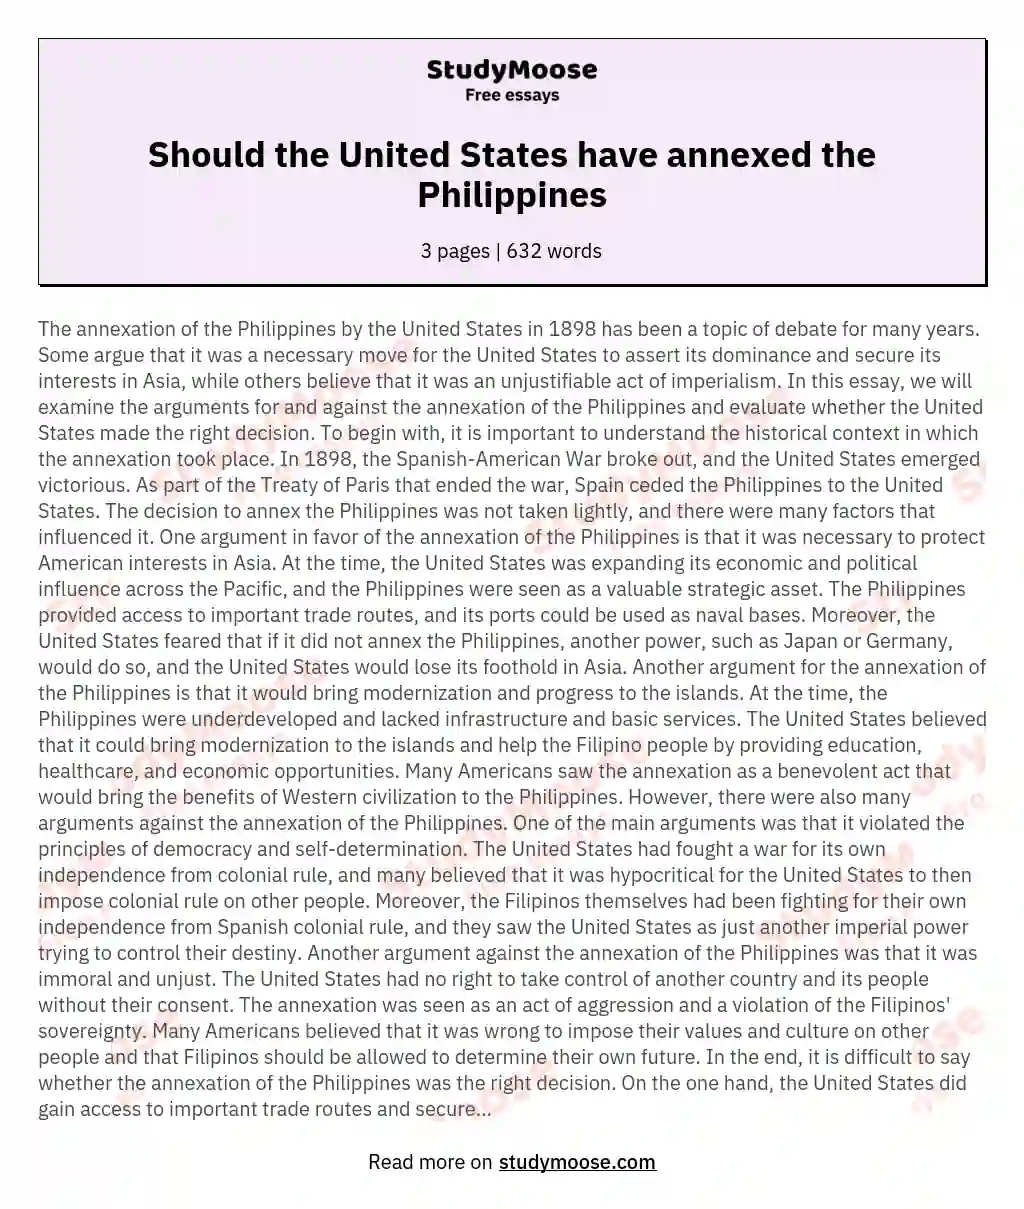 Should the United States have annexed the Philippines essay